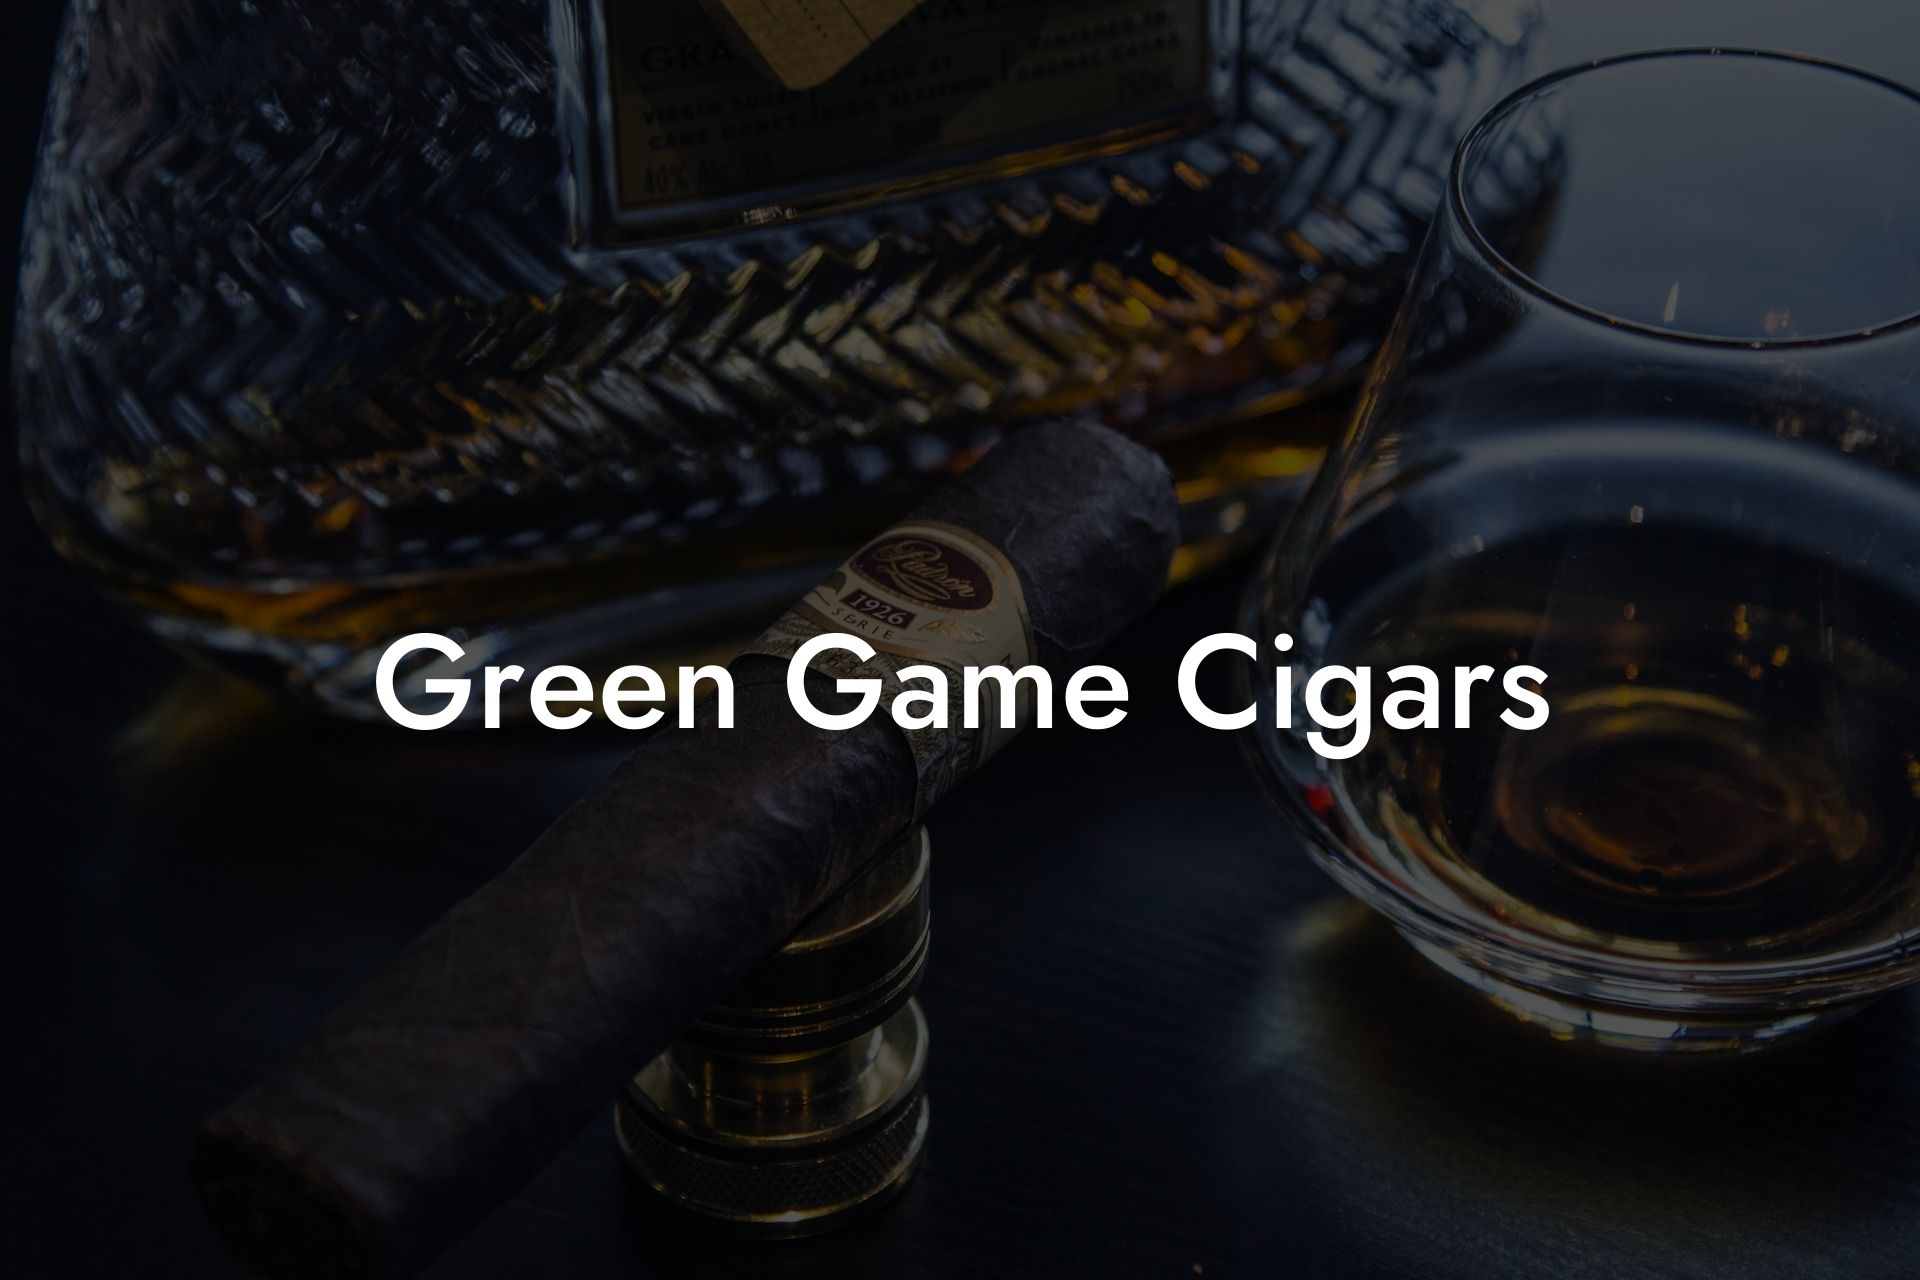 Green Game Cigars